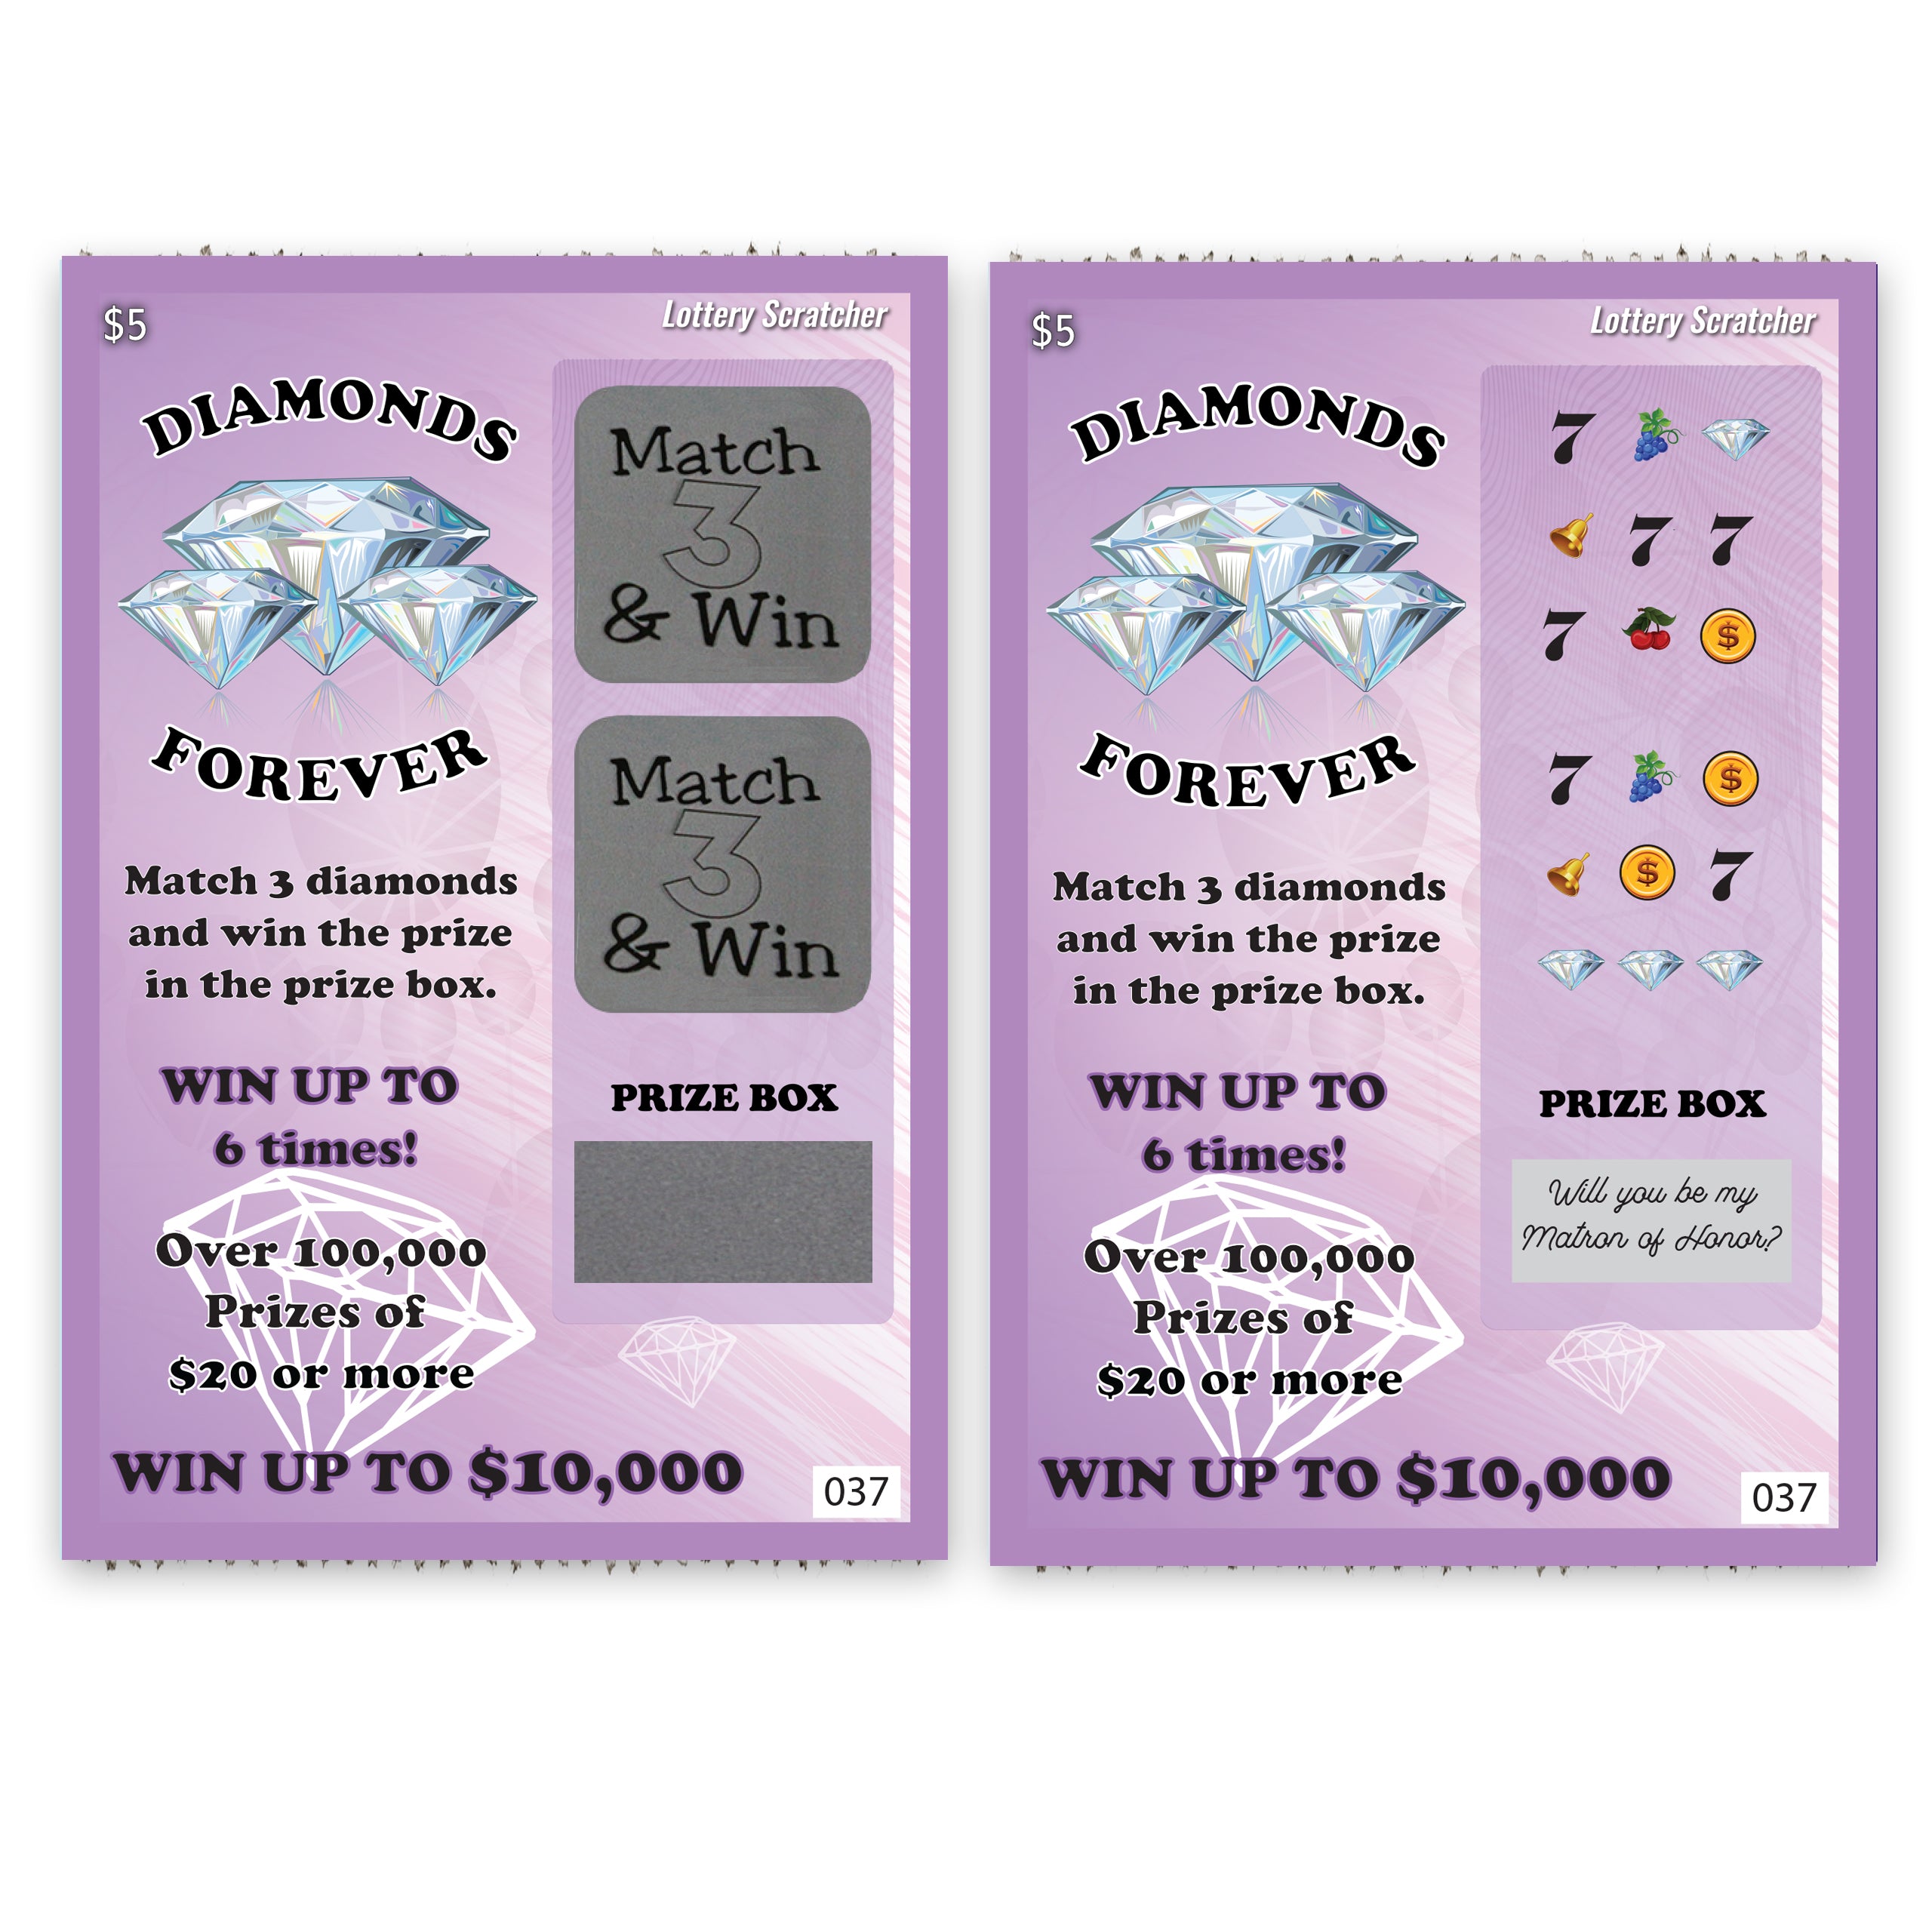 Will You Be My Matron of Honor? Lotto Replica Scratch Off Card 4" x 6" - Lavender - My Scratch Offs